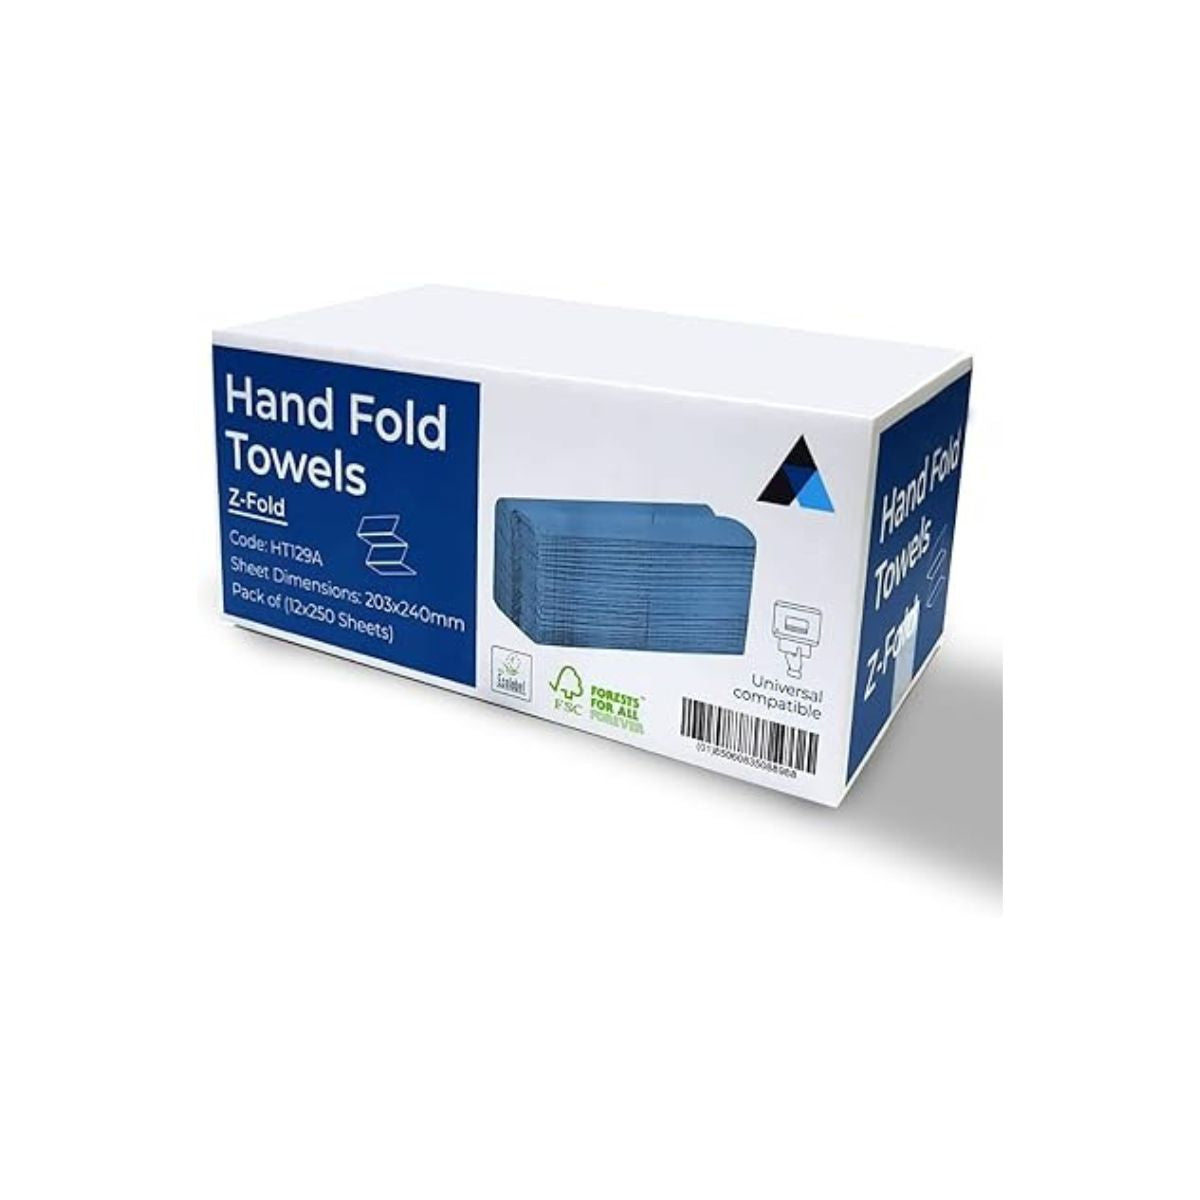 Z Fold Blue Paper Towels 3000 Blue Sheets Extra Strong and Super Absorbent 1 Ply Paper Hand Towels (9150166958390)